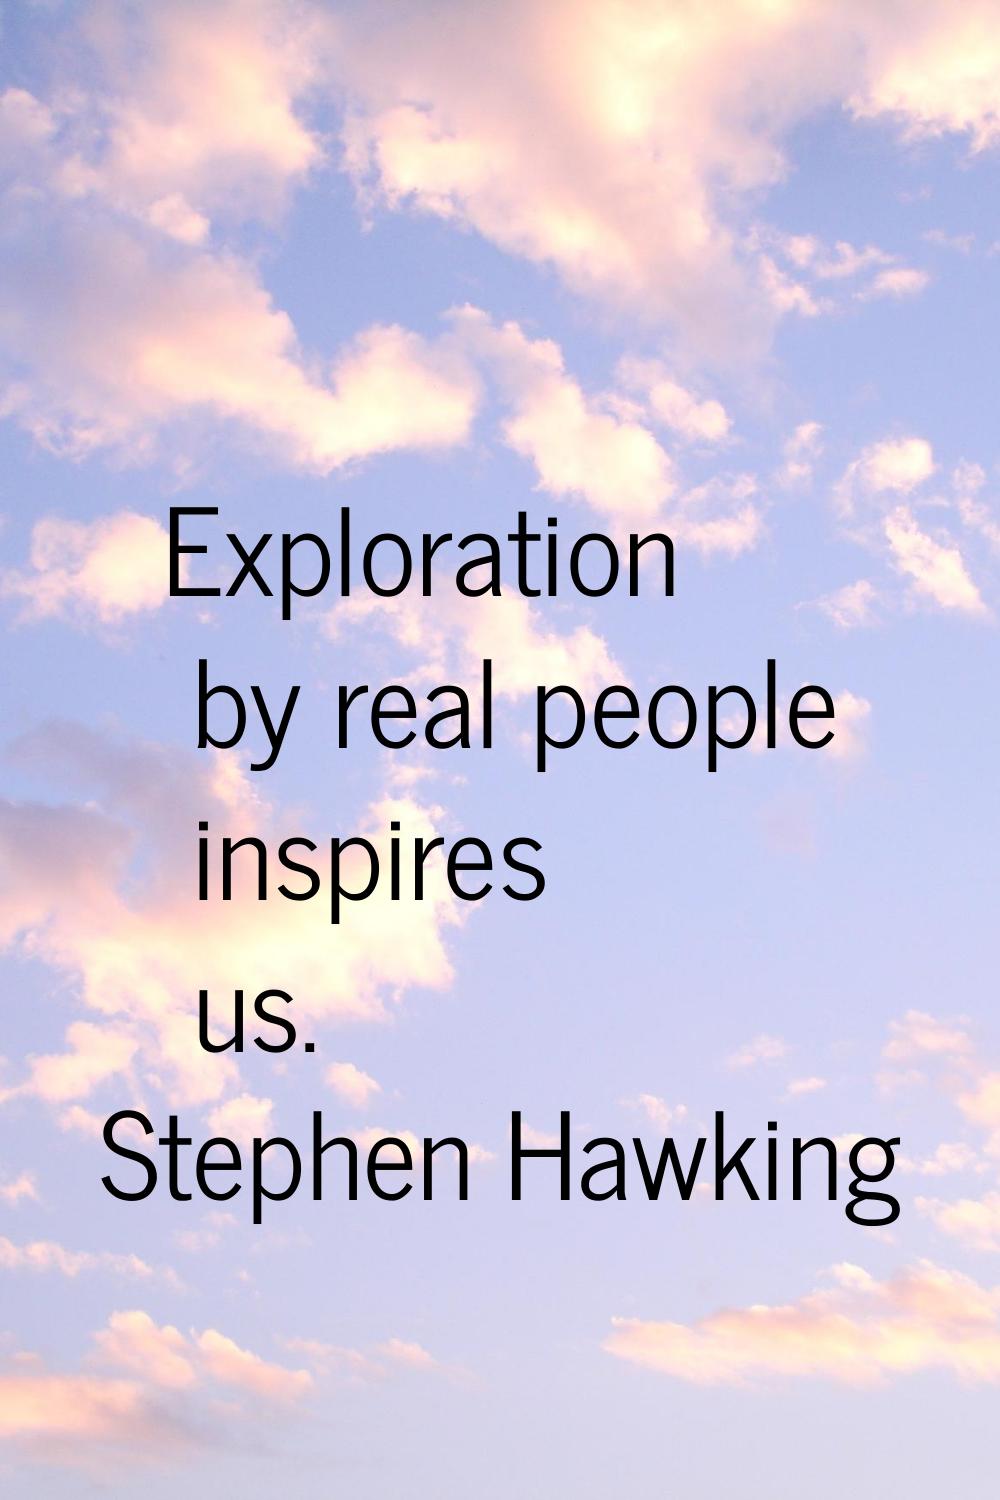 Exploration by real people inspires us.